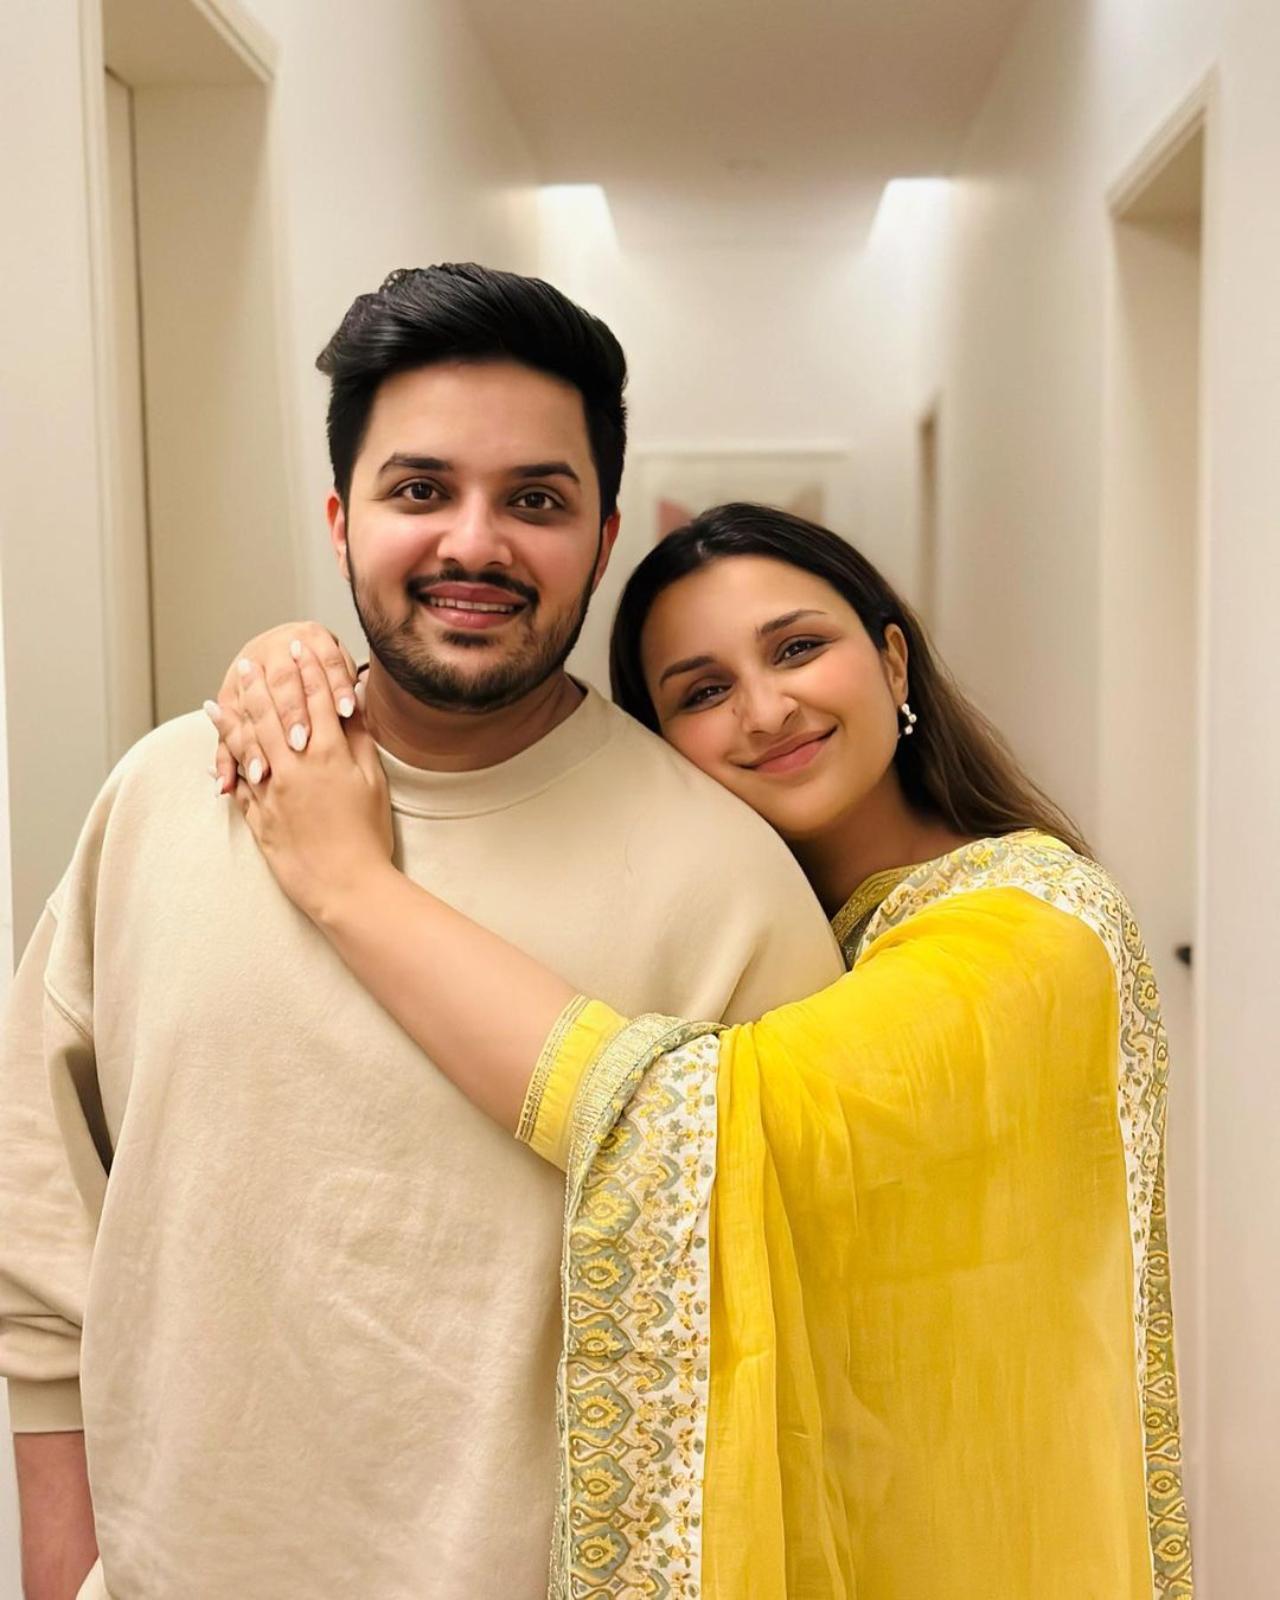 Parineeti Chopra shared a couple of pictures with her brother Sahaj Chopra giving a glimpse into their aesthetic looking celebrations